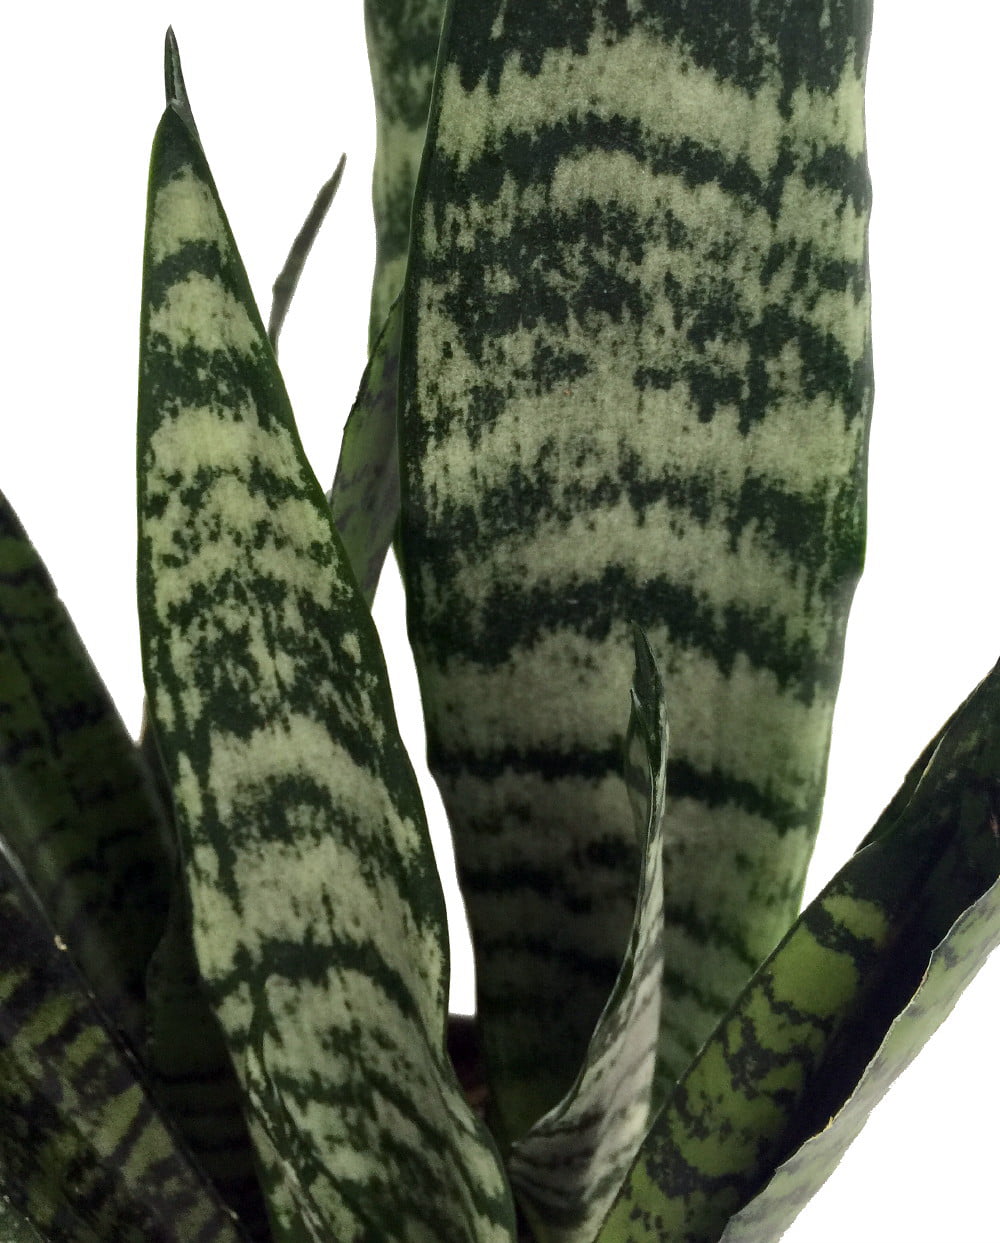 Zeylanica Snake Plant， Mother-In-Law's Tongue - Sanseveria - 2 Plants - 3